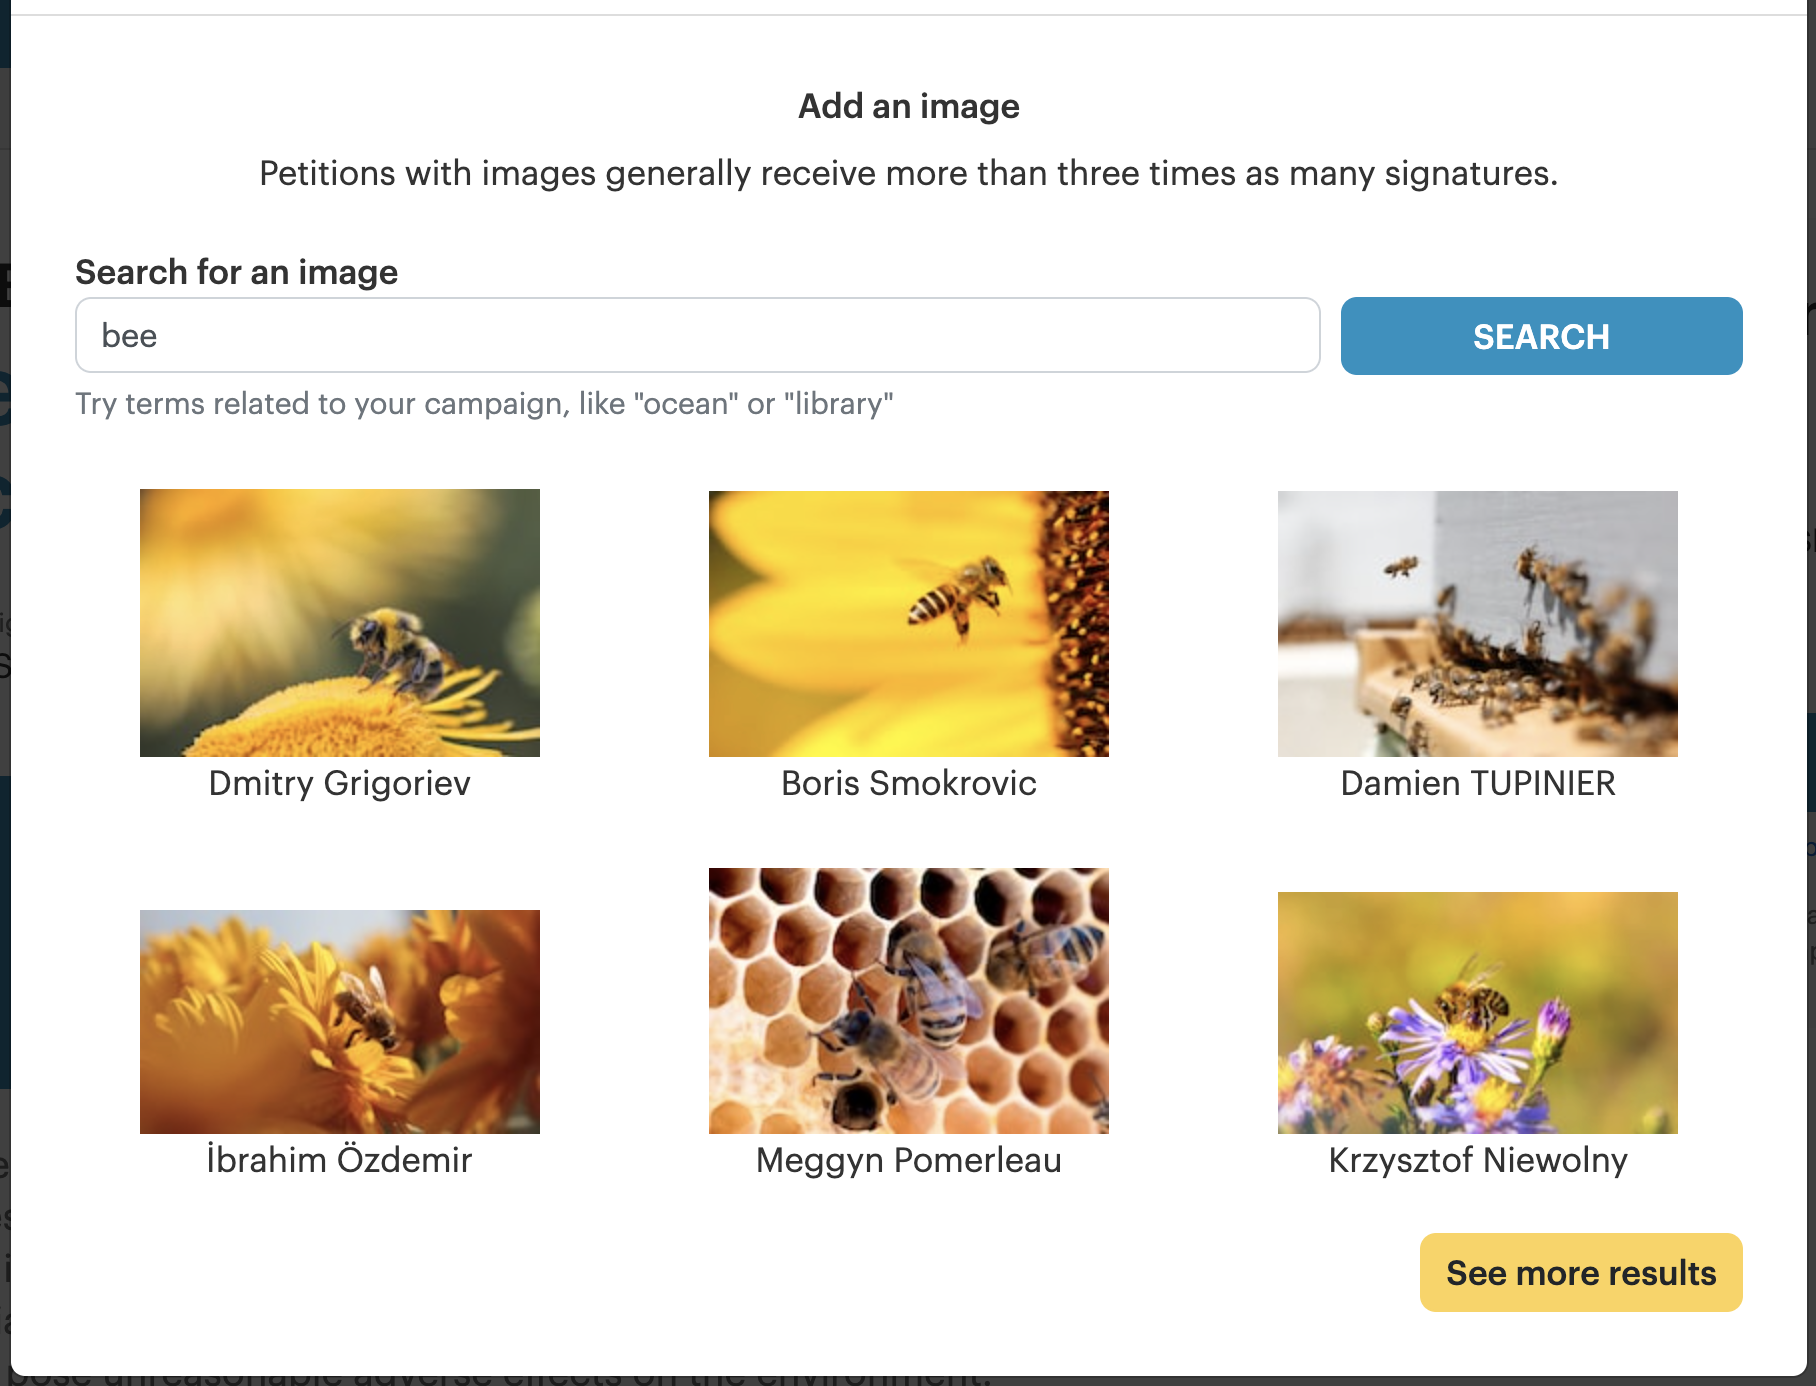 The free image library allows a leader to search for campaign images.